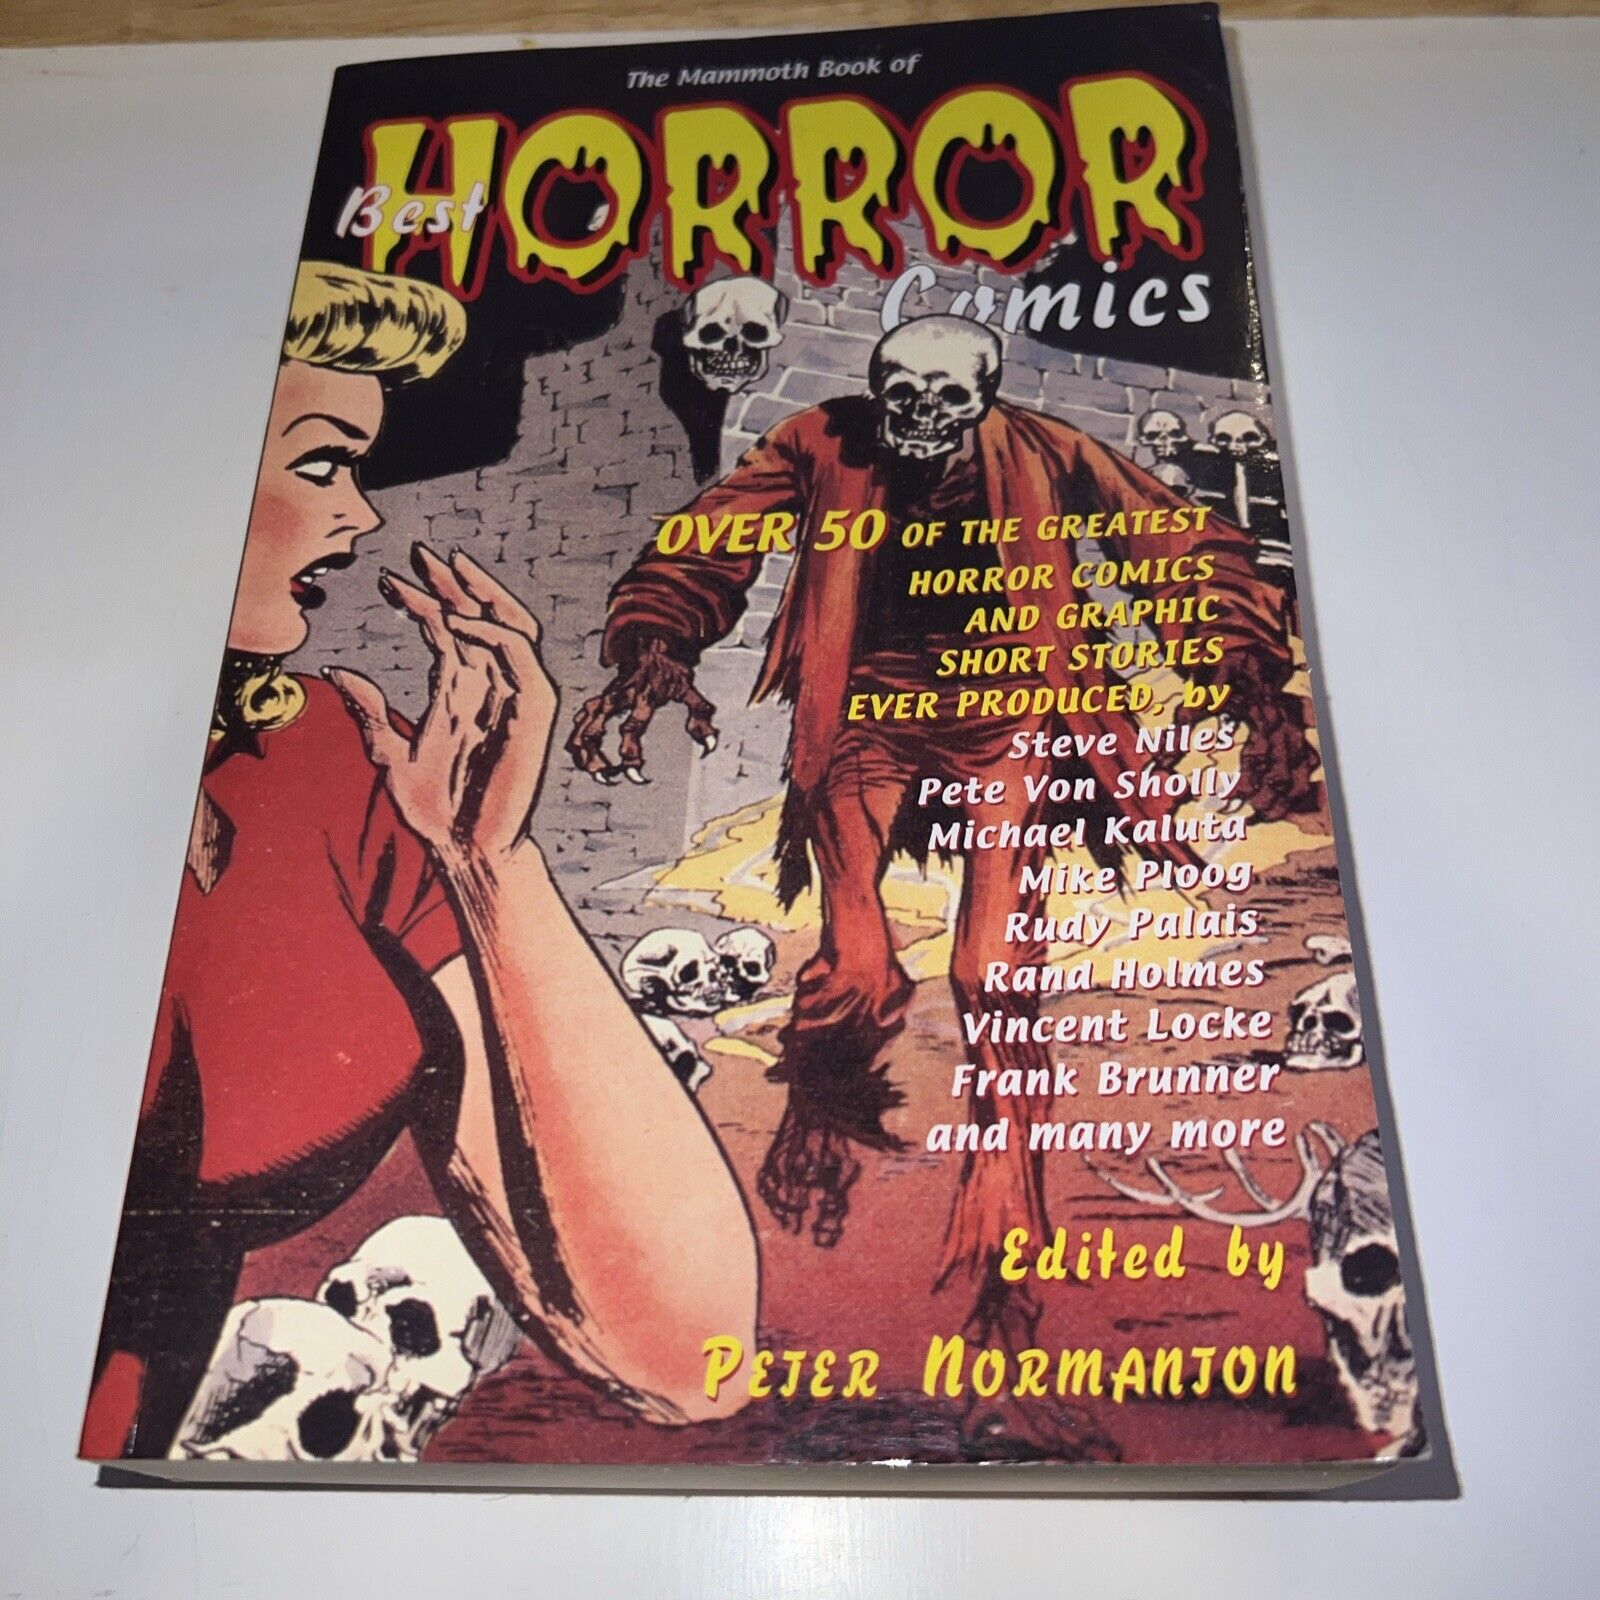 The Mammoth Book of Best Horror Comics by Peter Normanton Paperback Book The